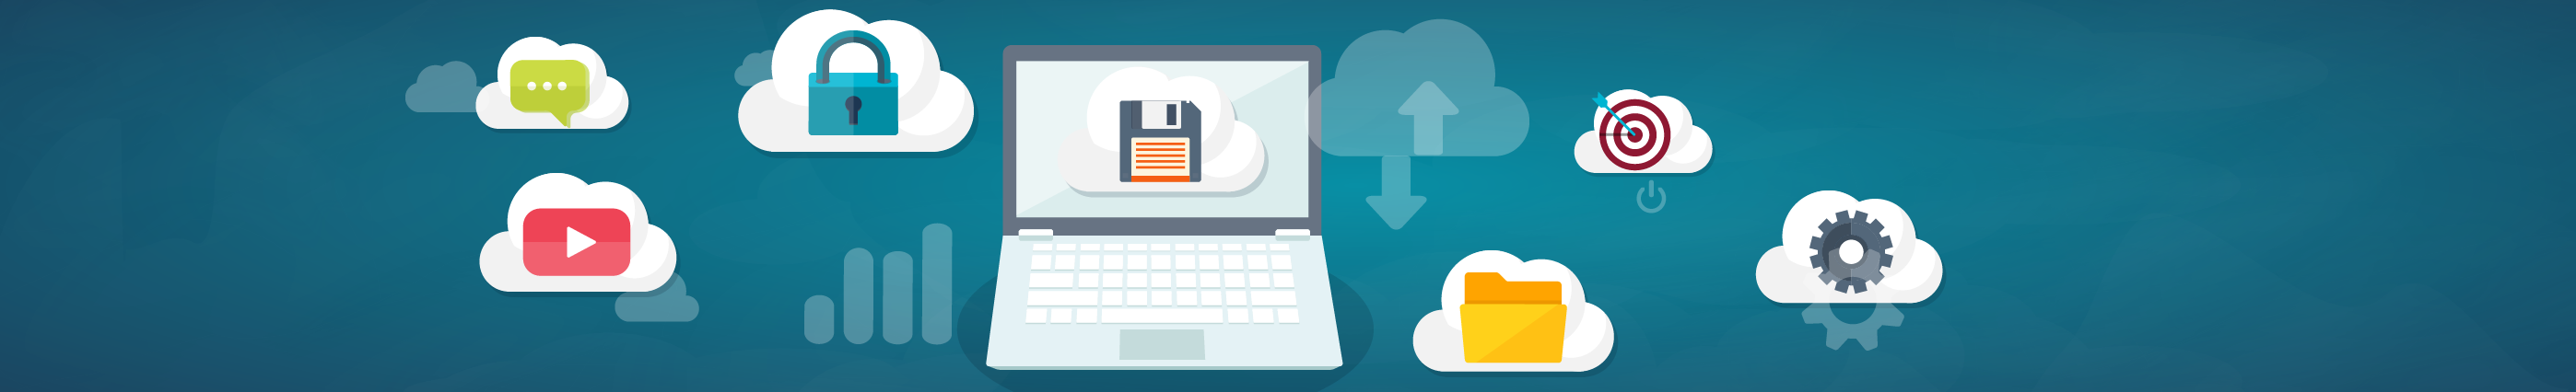 Cloud computing illustration, Data storage device, media server. Web hosting and cloud technology. Data protection, database security. Backup, copy, migrate data between cloud storage services.